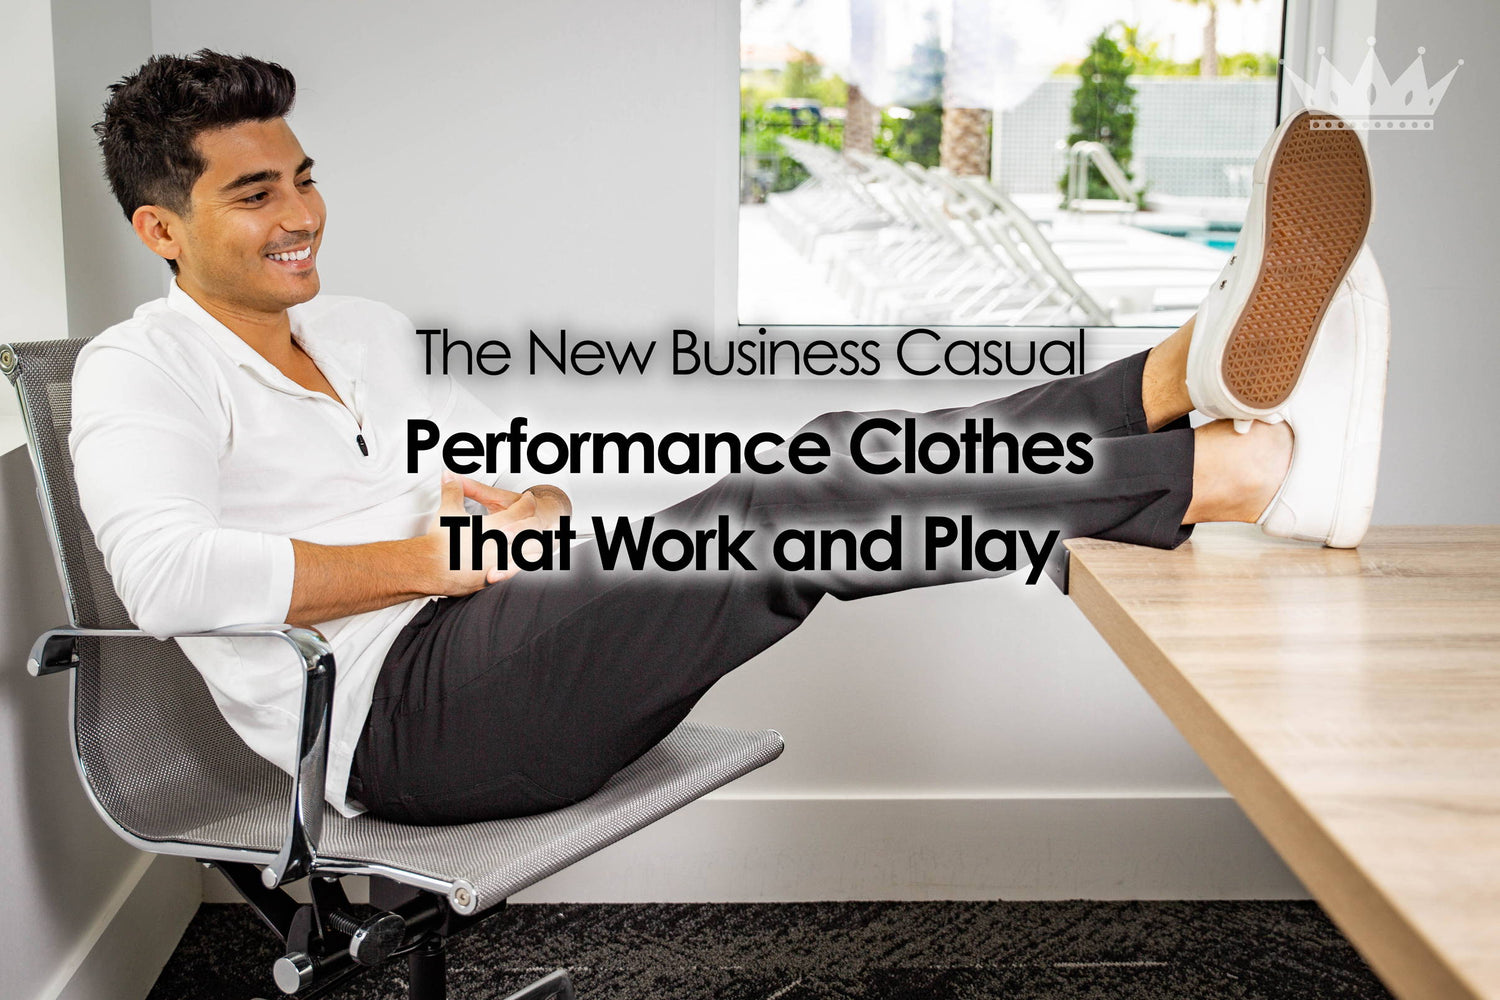 The New Business Casual: Performance Clothes that Work and Play